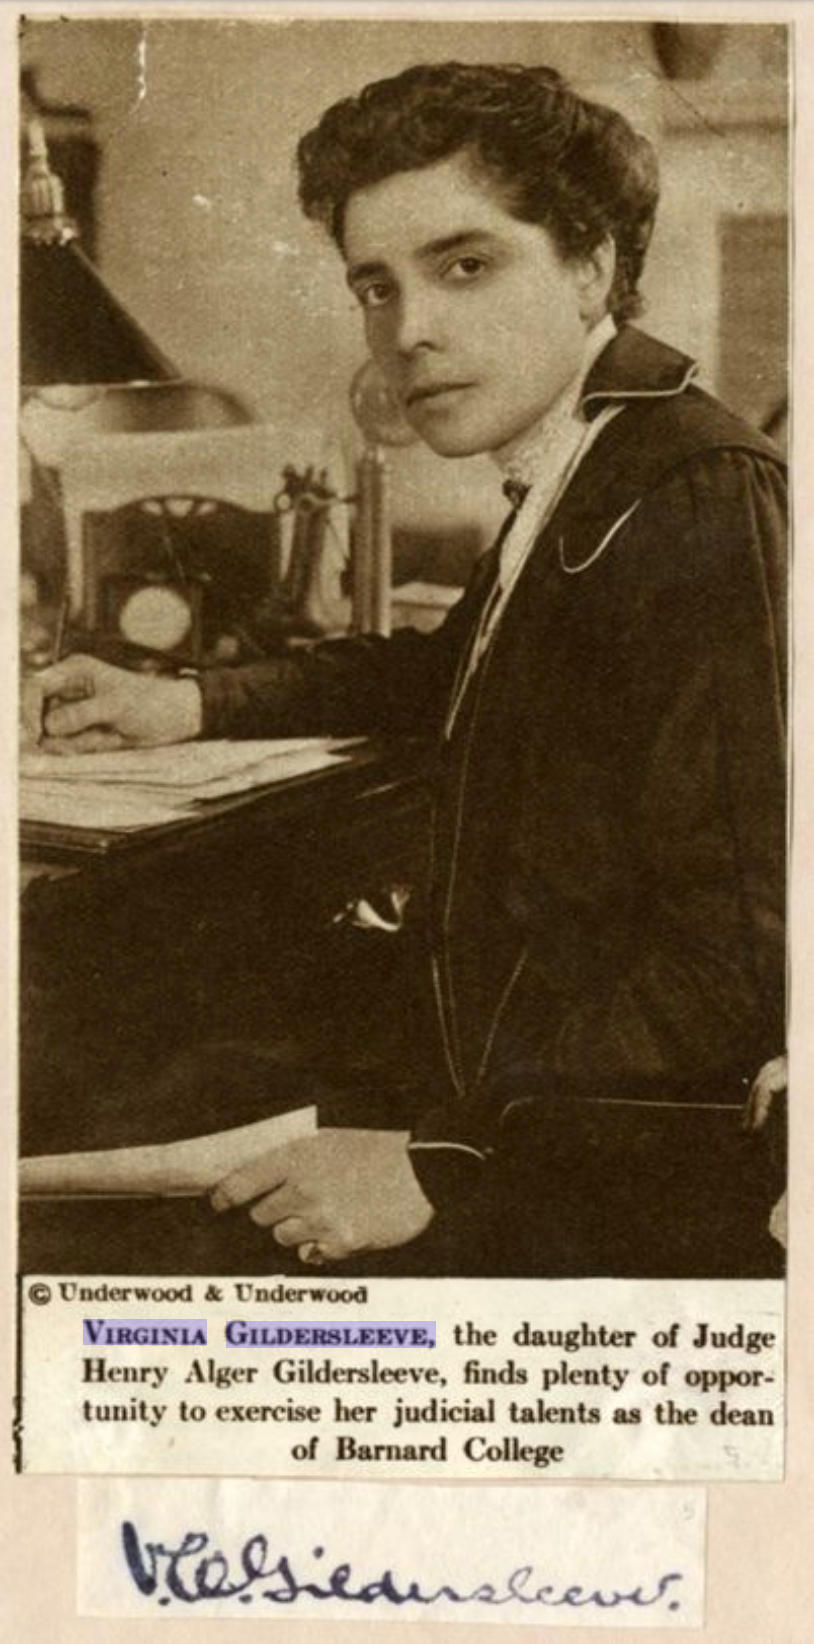 A news clipping shows a photo of Gildersleeve sitting at a writing desk and looking sideways at the camera